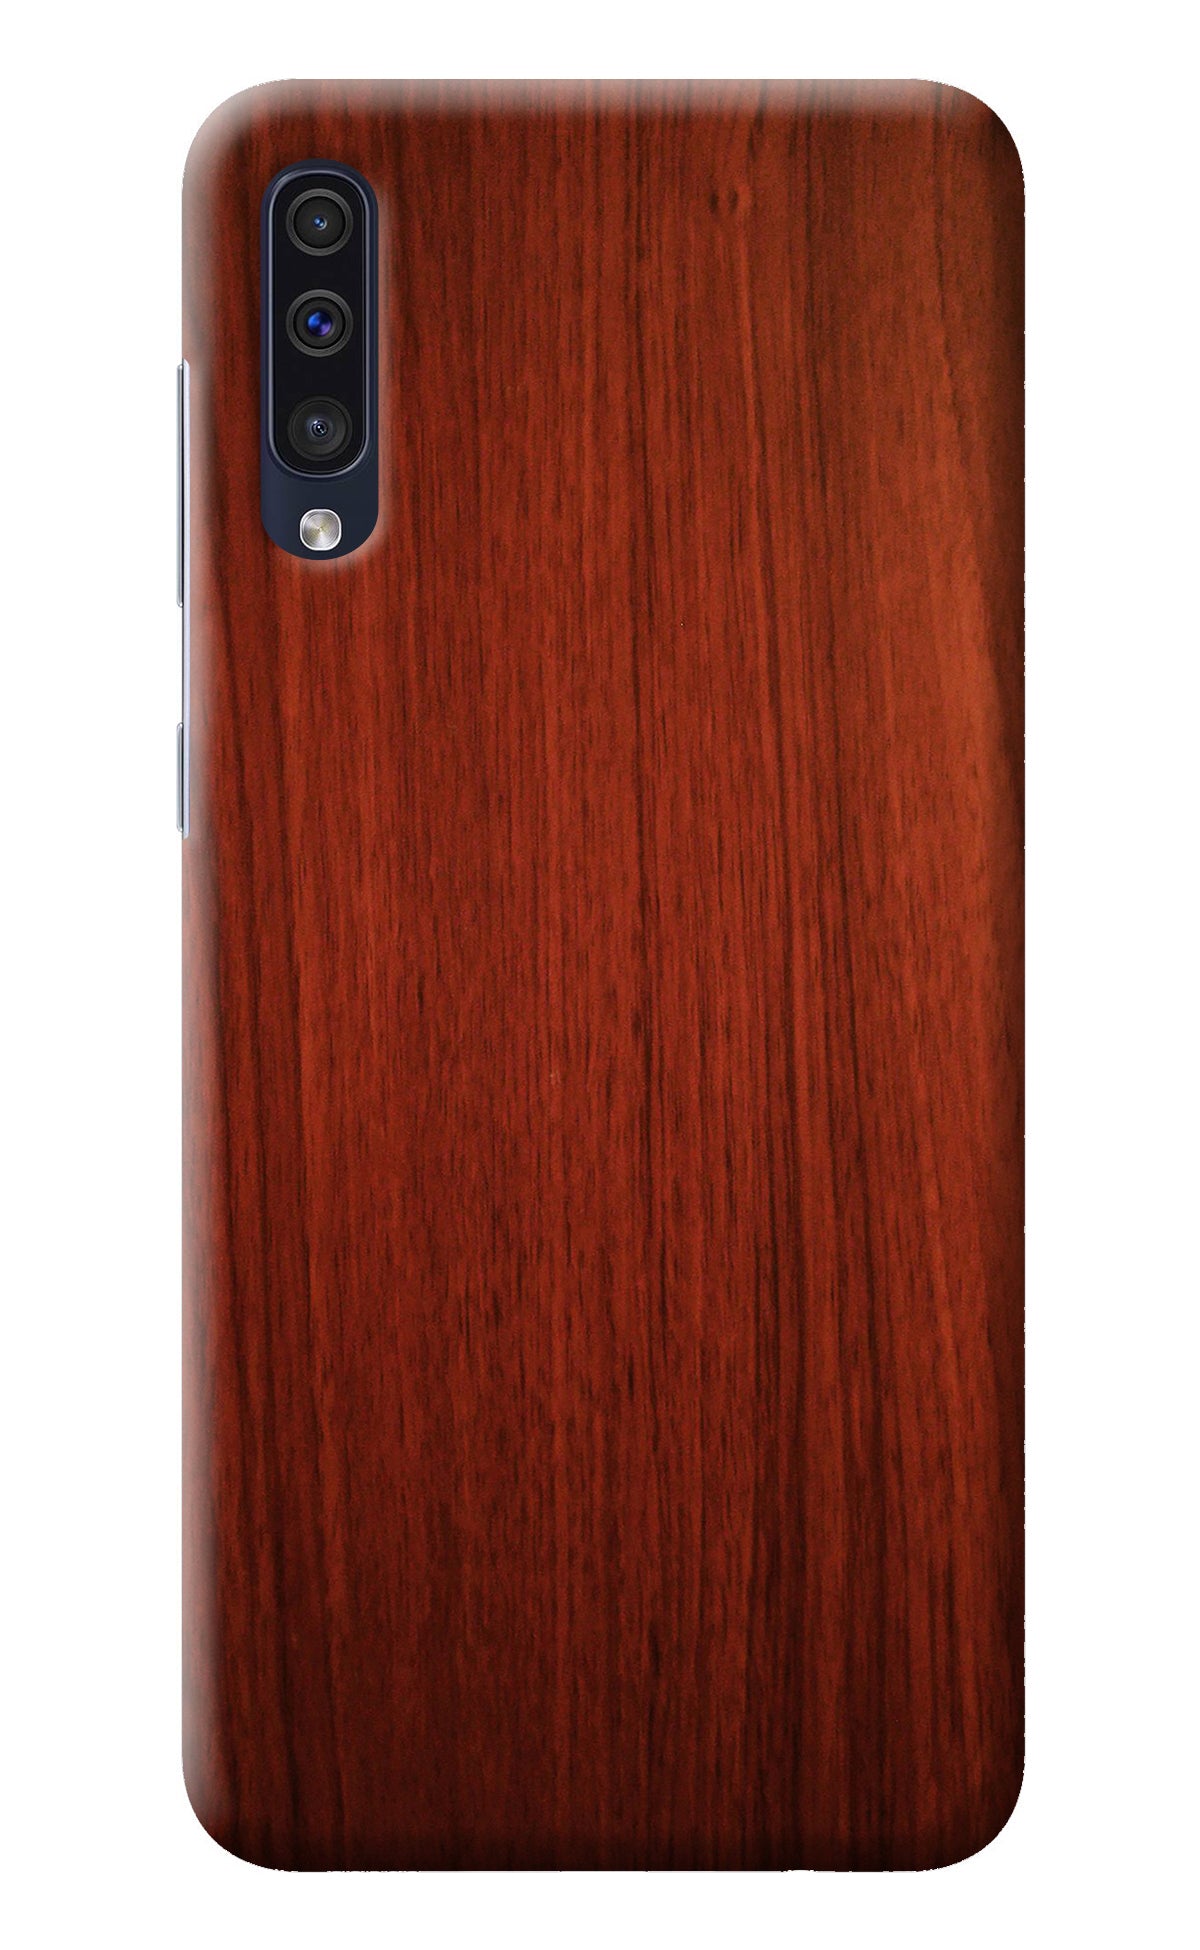 Wooden Plain Pattern Samsung A50/A50s/A30s Back Cover